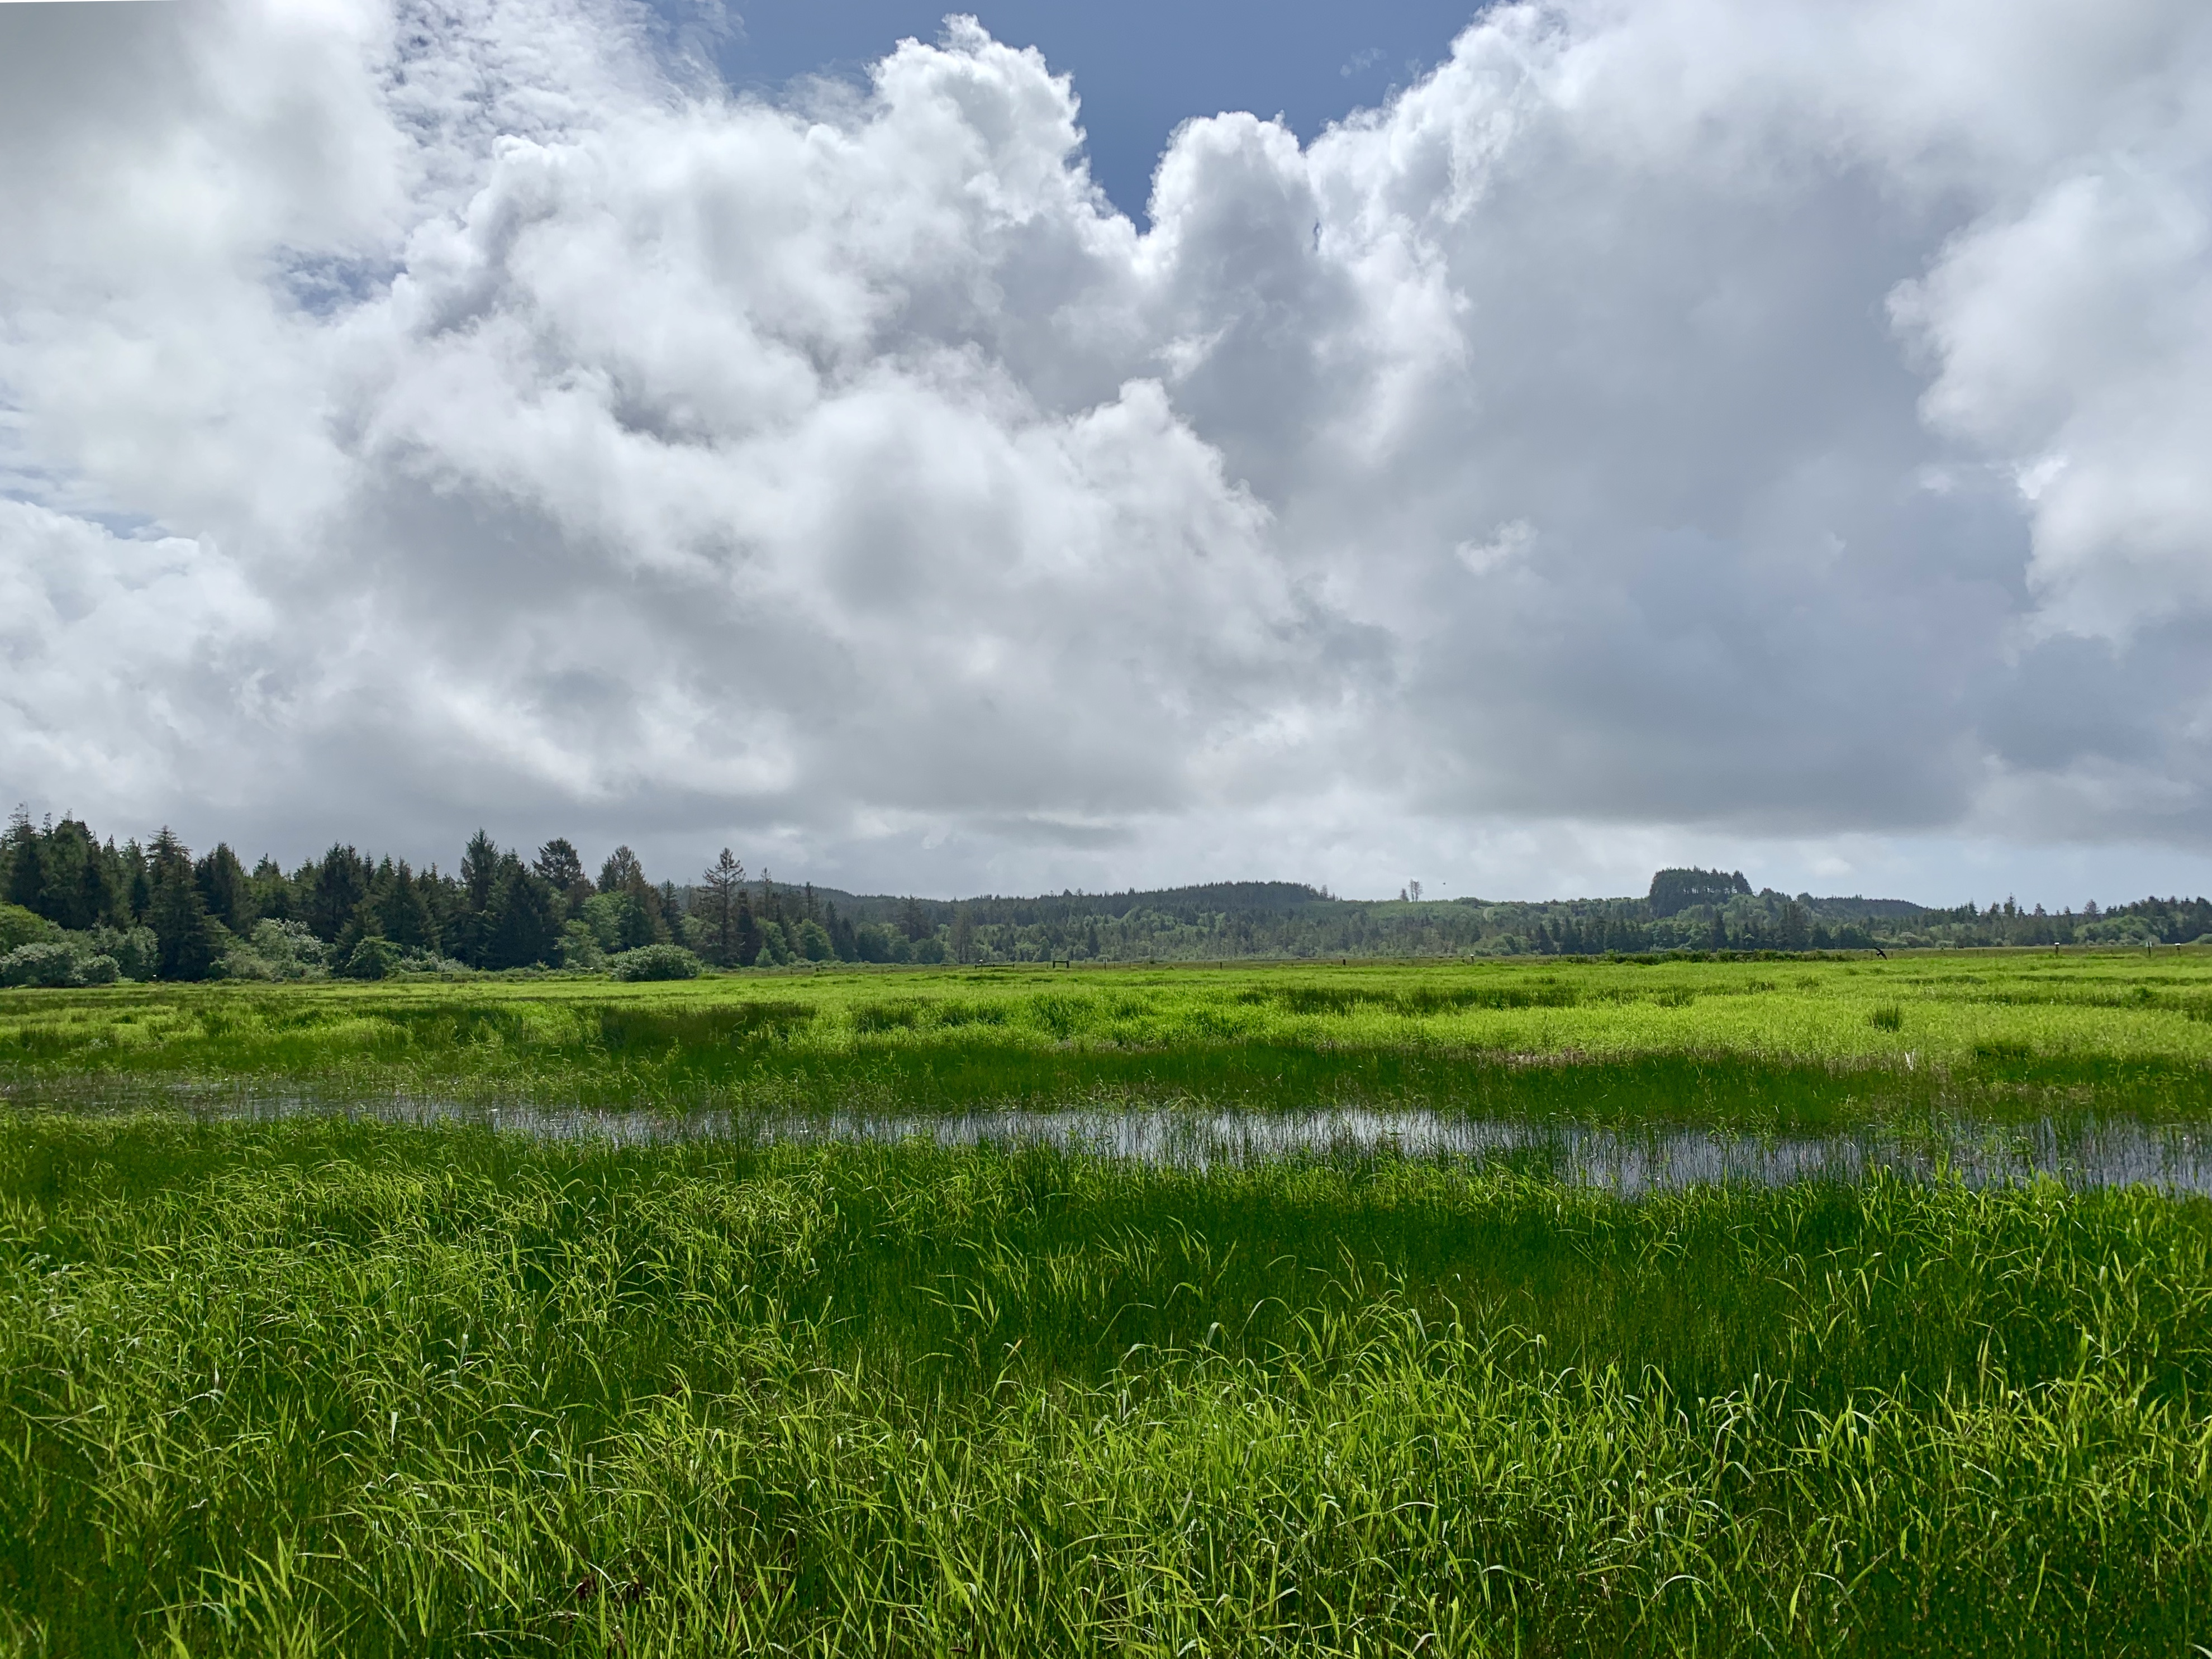 Grassy wetland habitat with large bright white clouds in the sky.